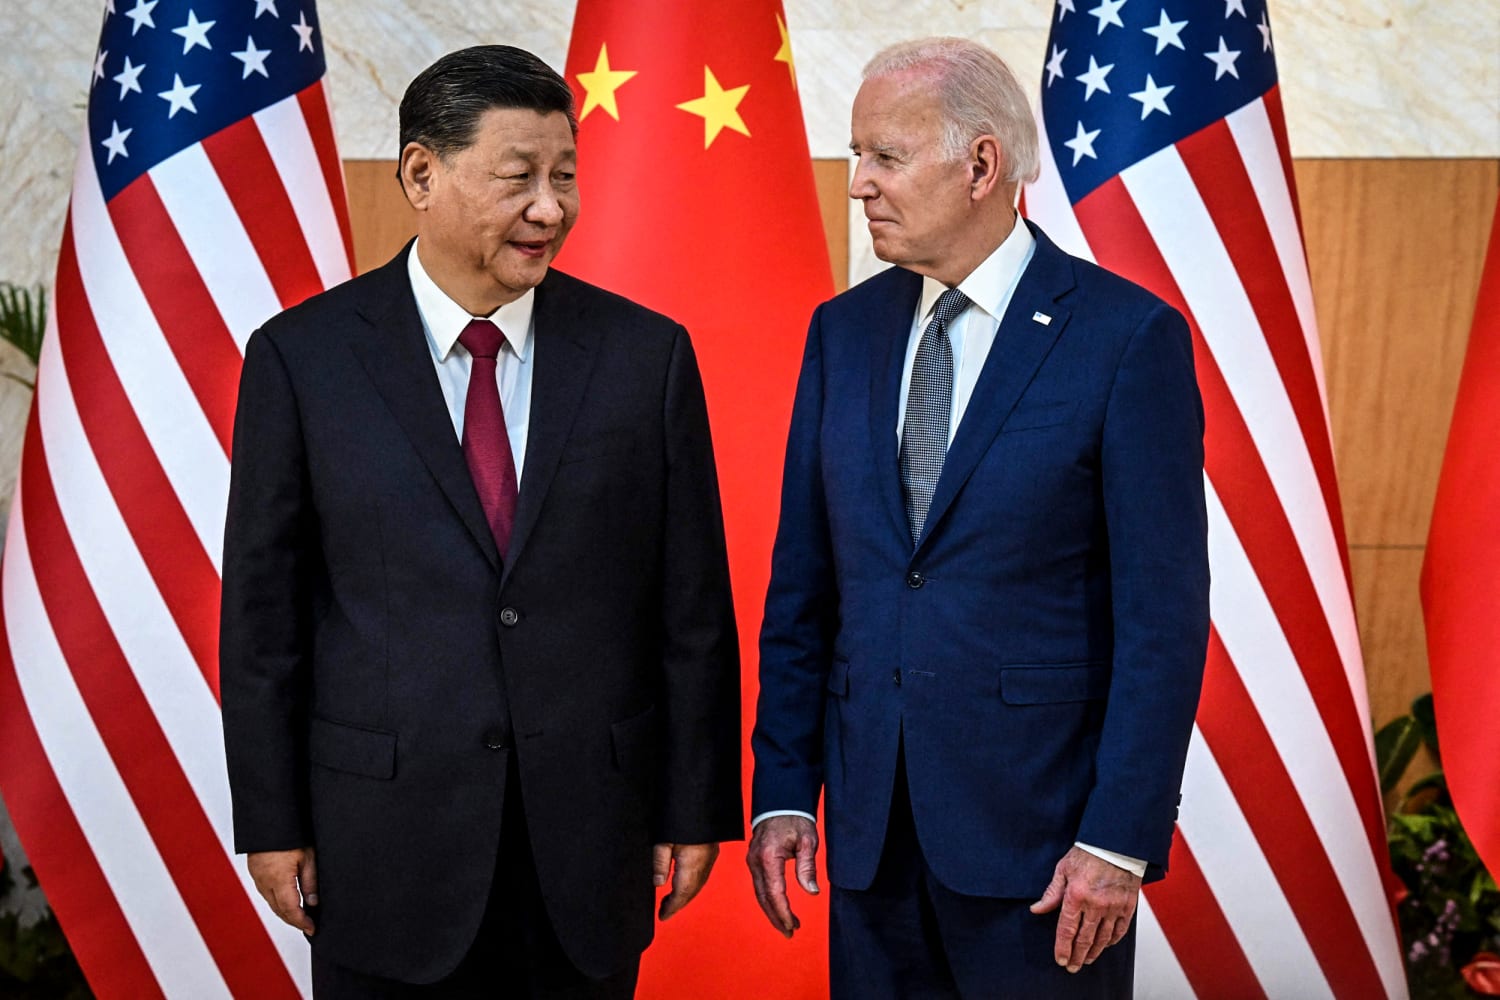 White House hopes Biden's relationship with Xi can defuse U.S.-China tensions